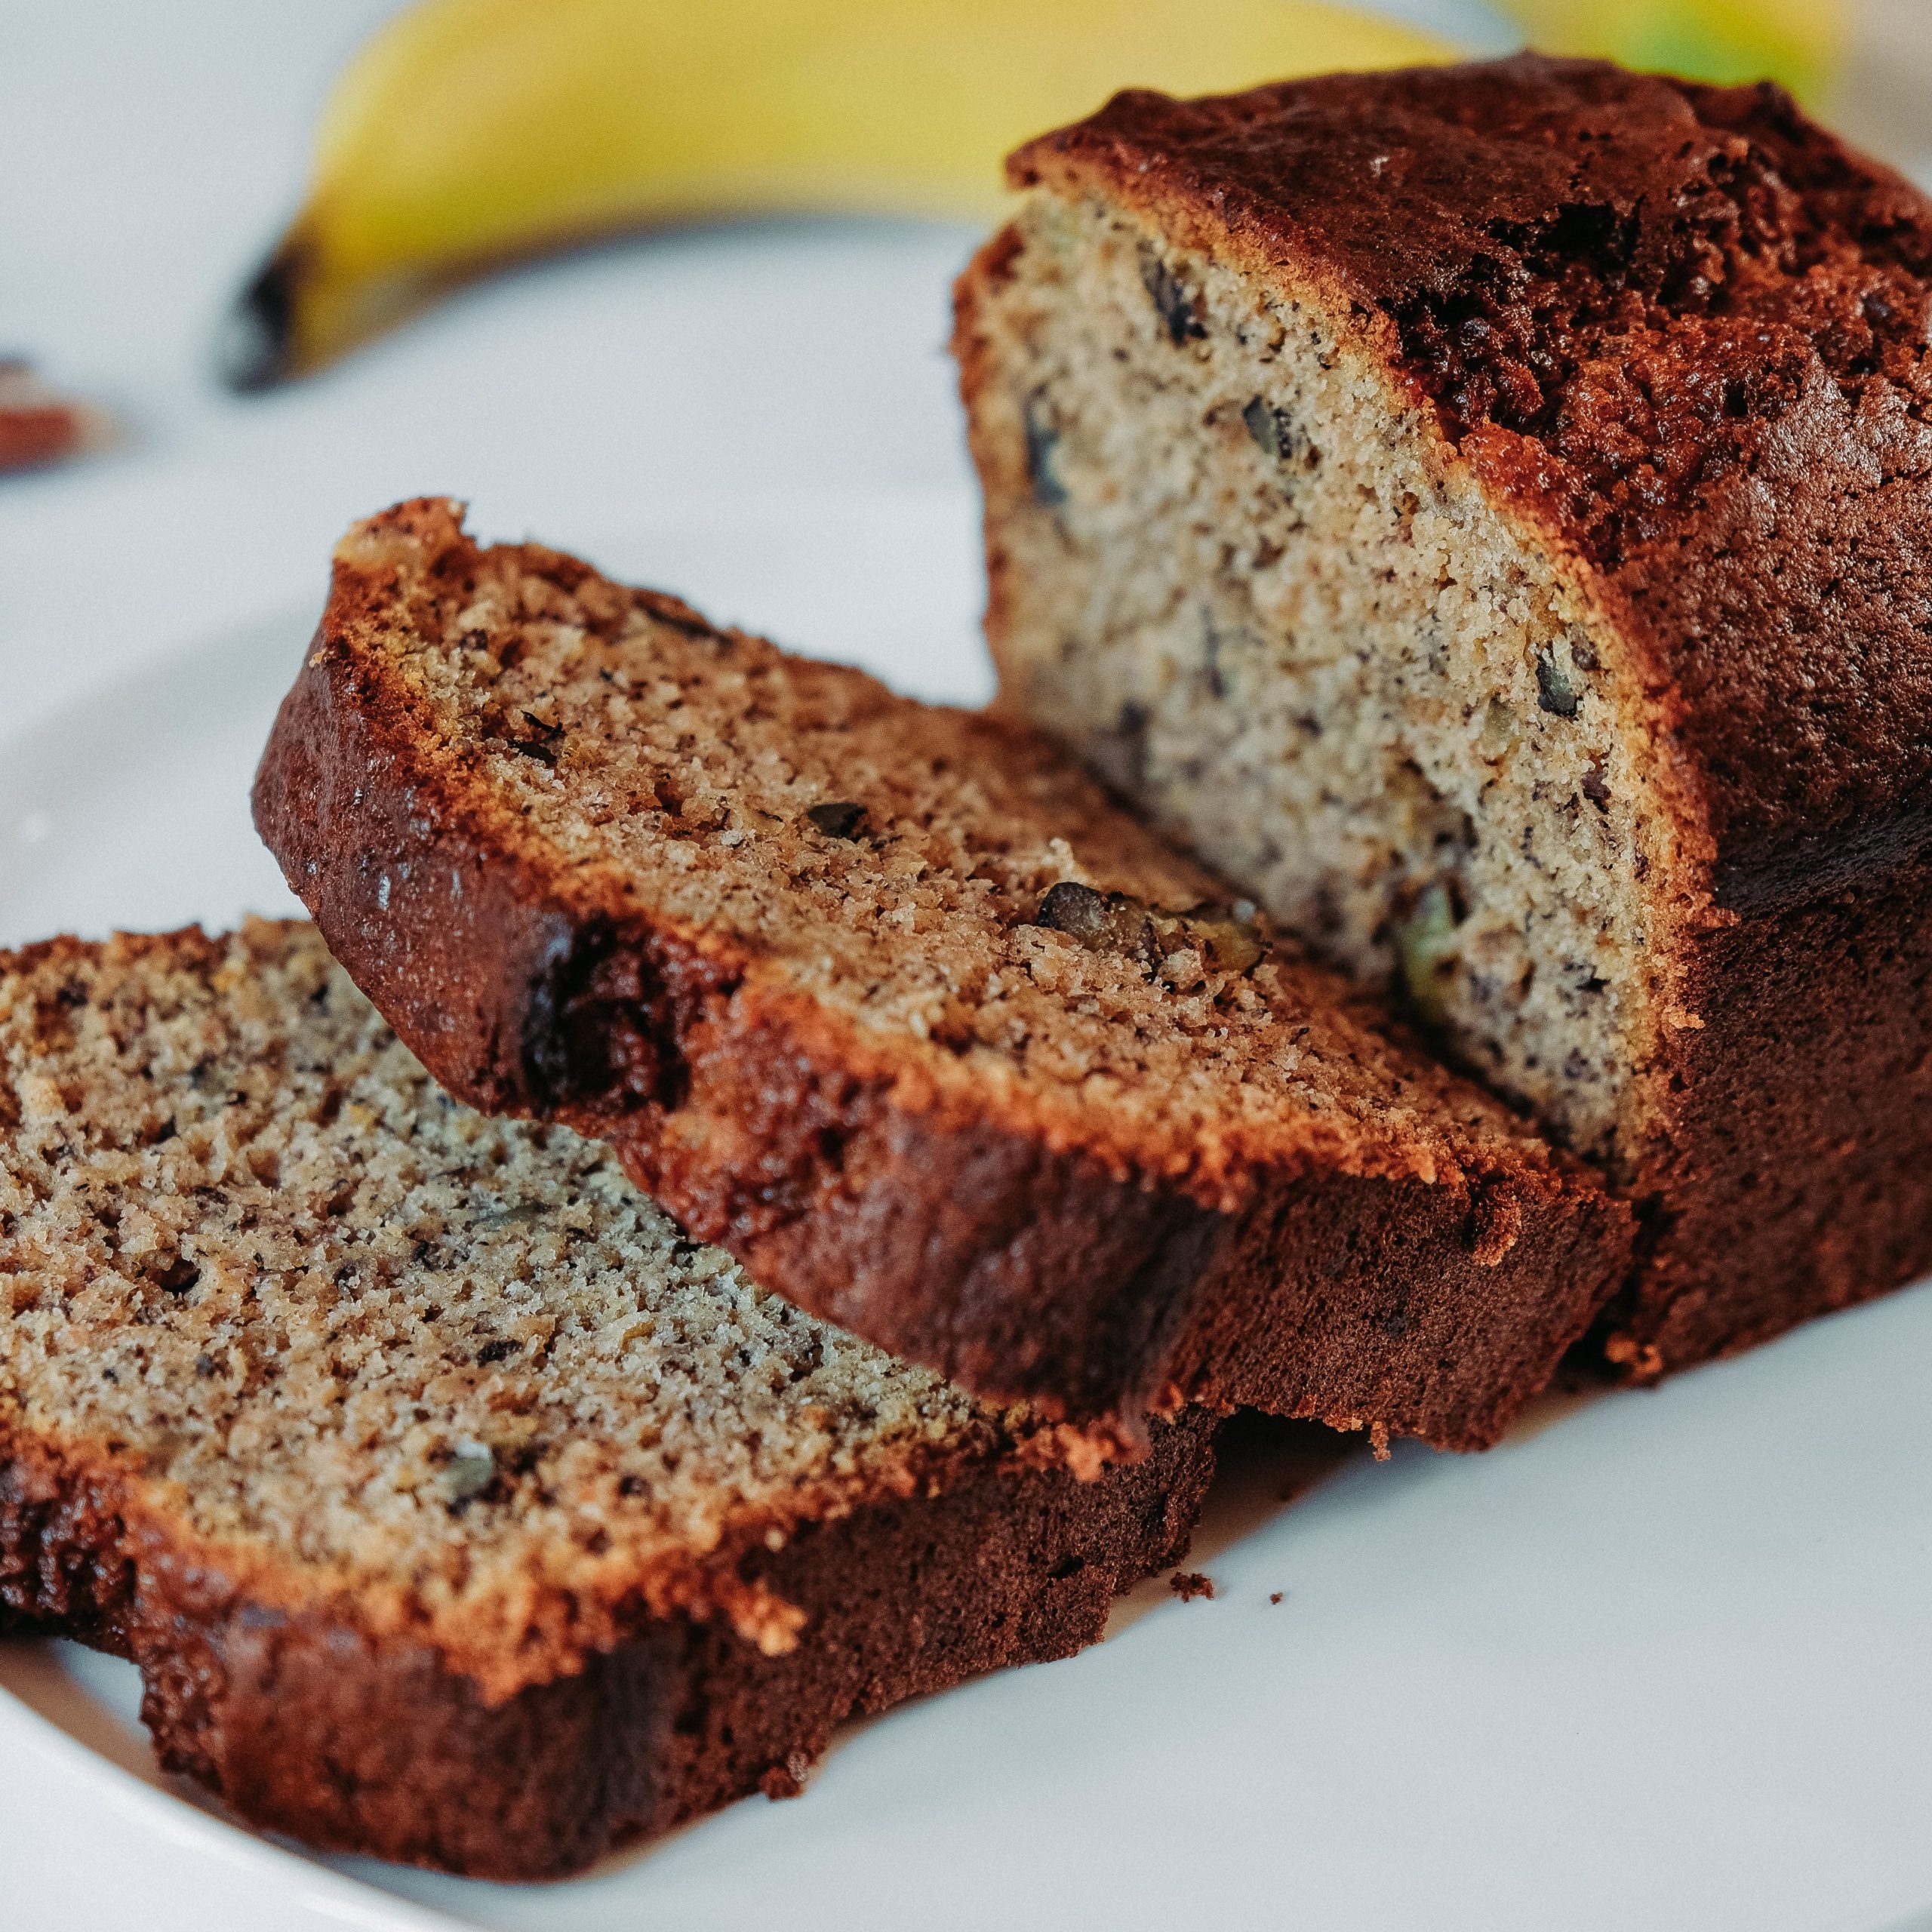 sliced banana bread on white plate made with campbell grains khorasan wheat